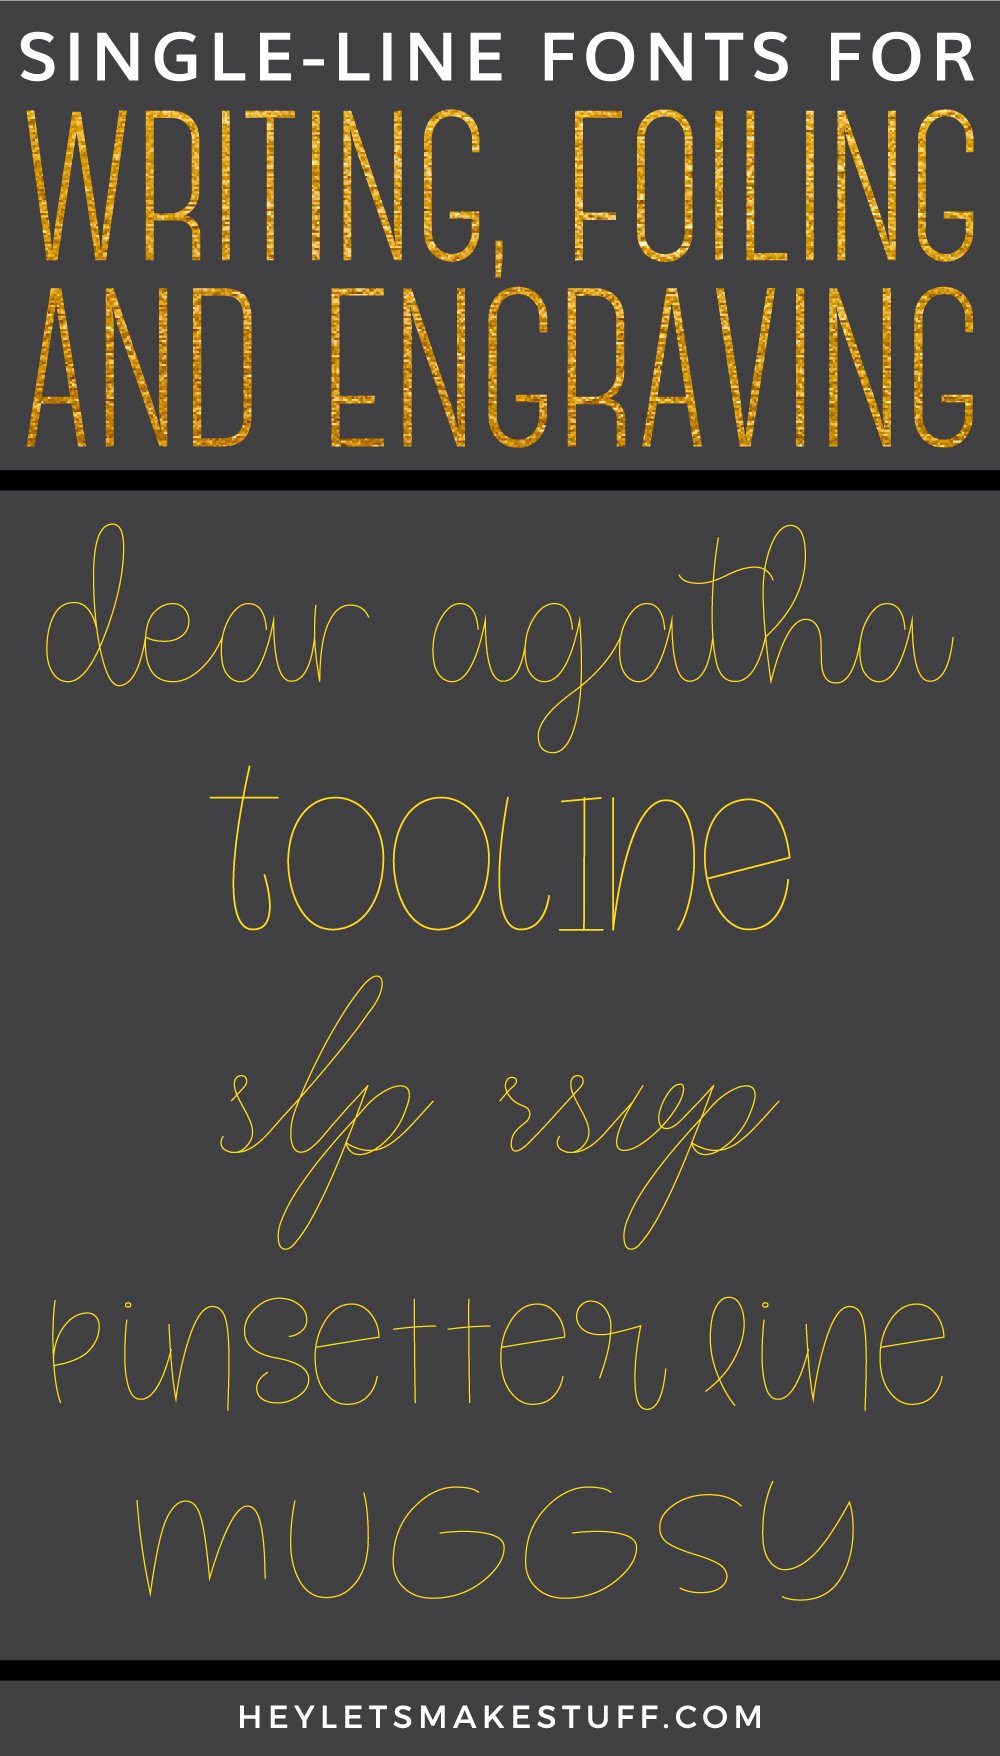 Single Line Fonts for Writing, Engraving, Foiling, and More